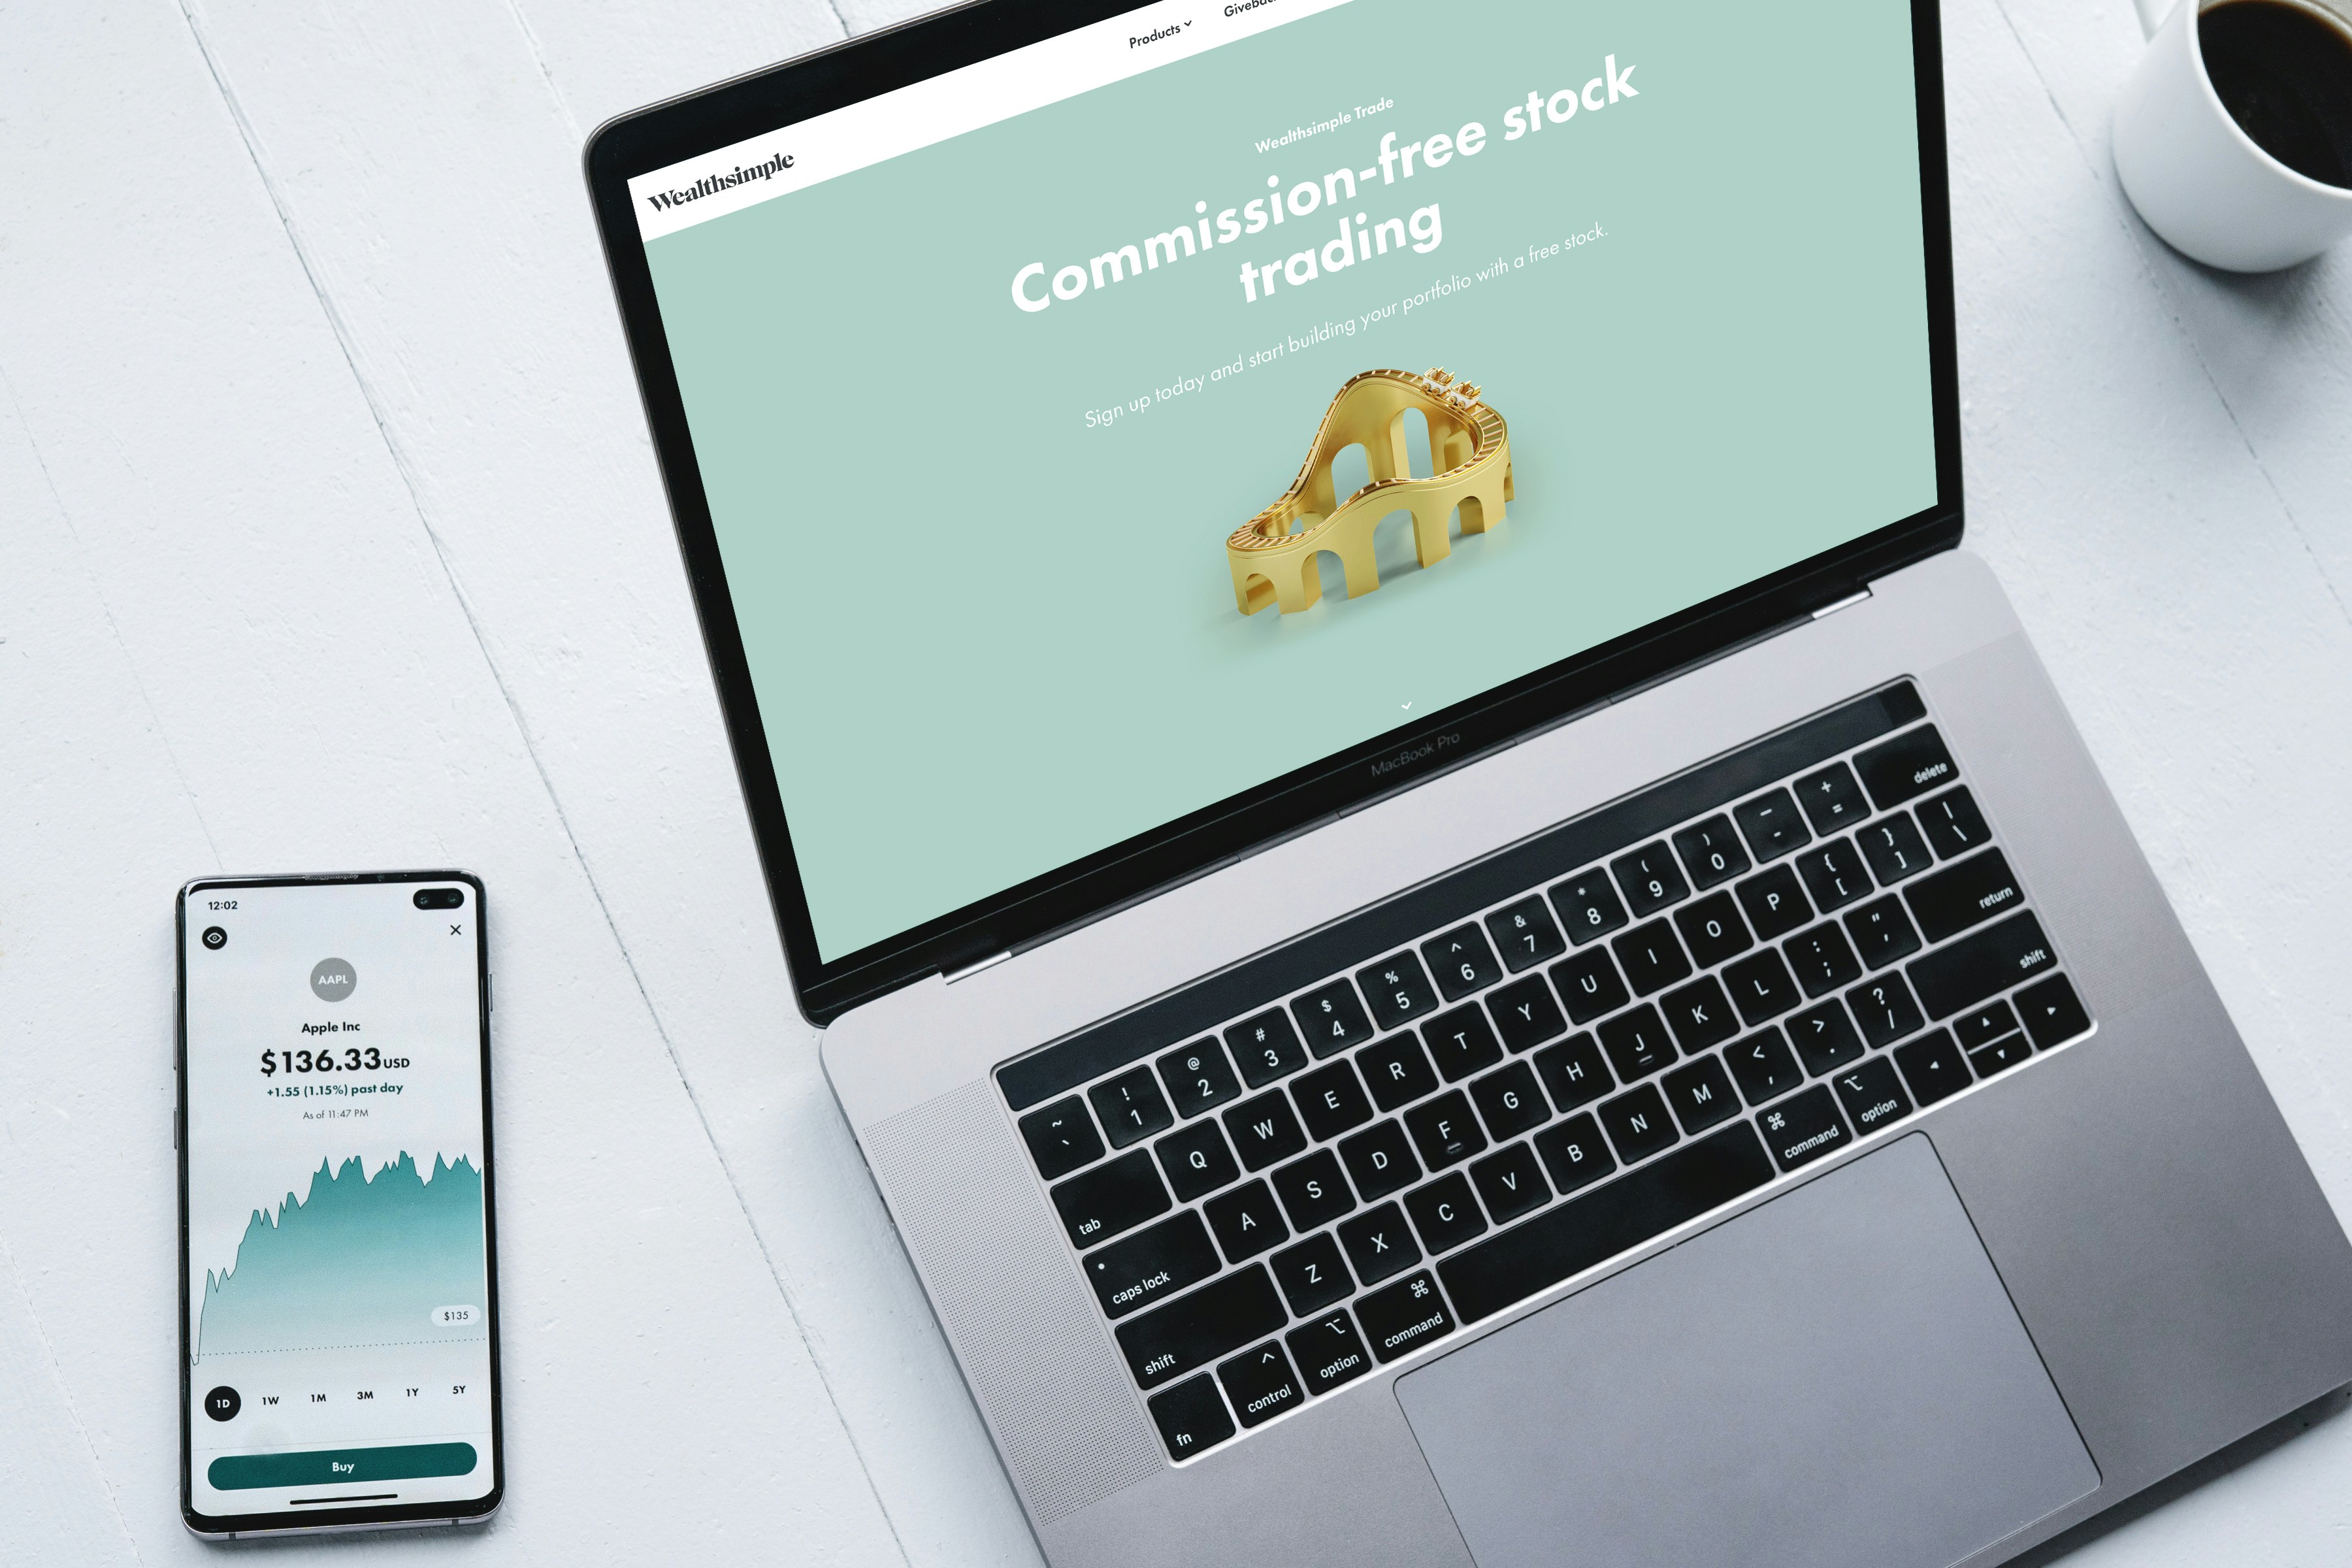 Commission free stock trading and your laptop and phone with Wealthsimple Trade! Get a free stock thanks to Wealthsimple!